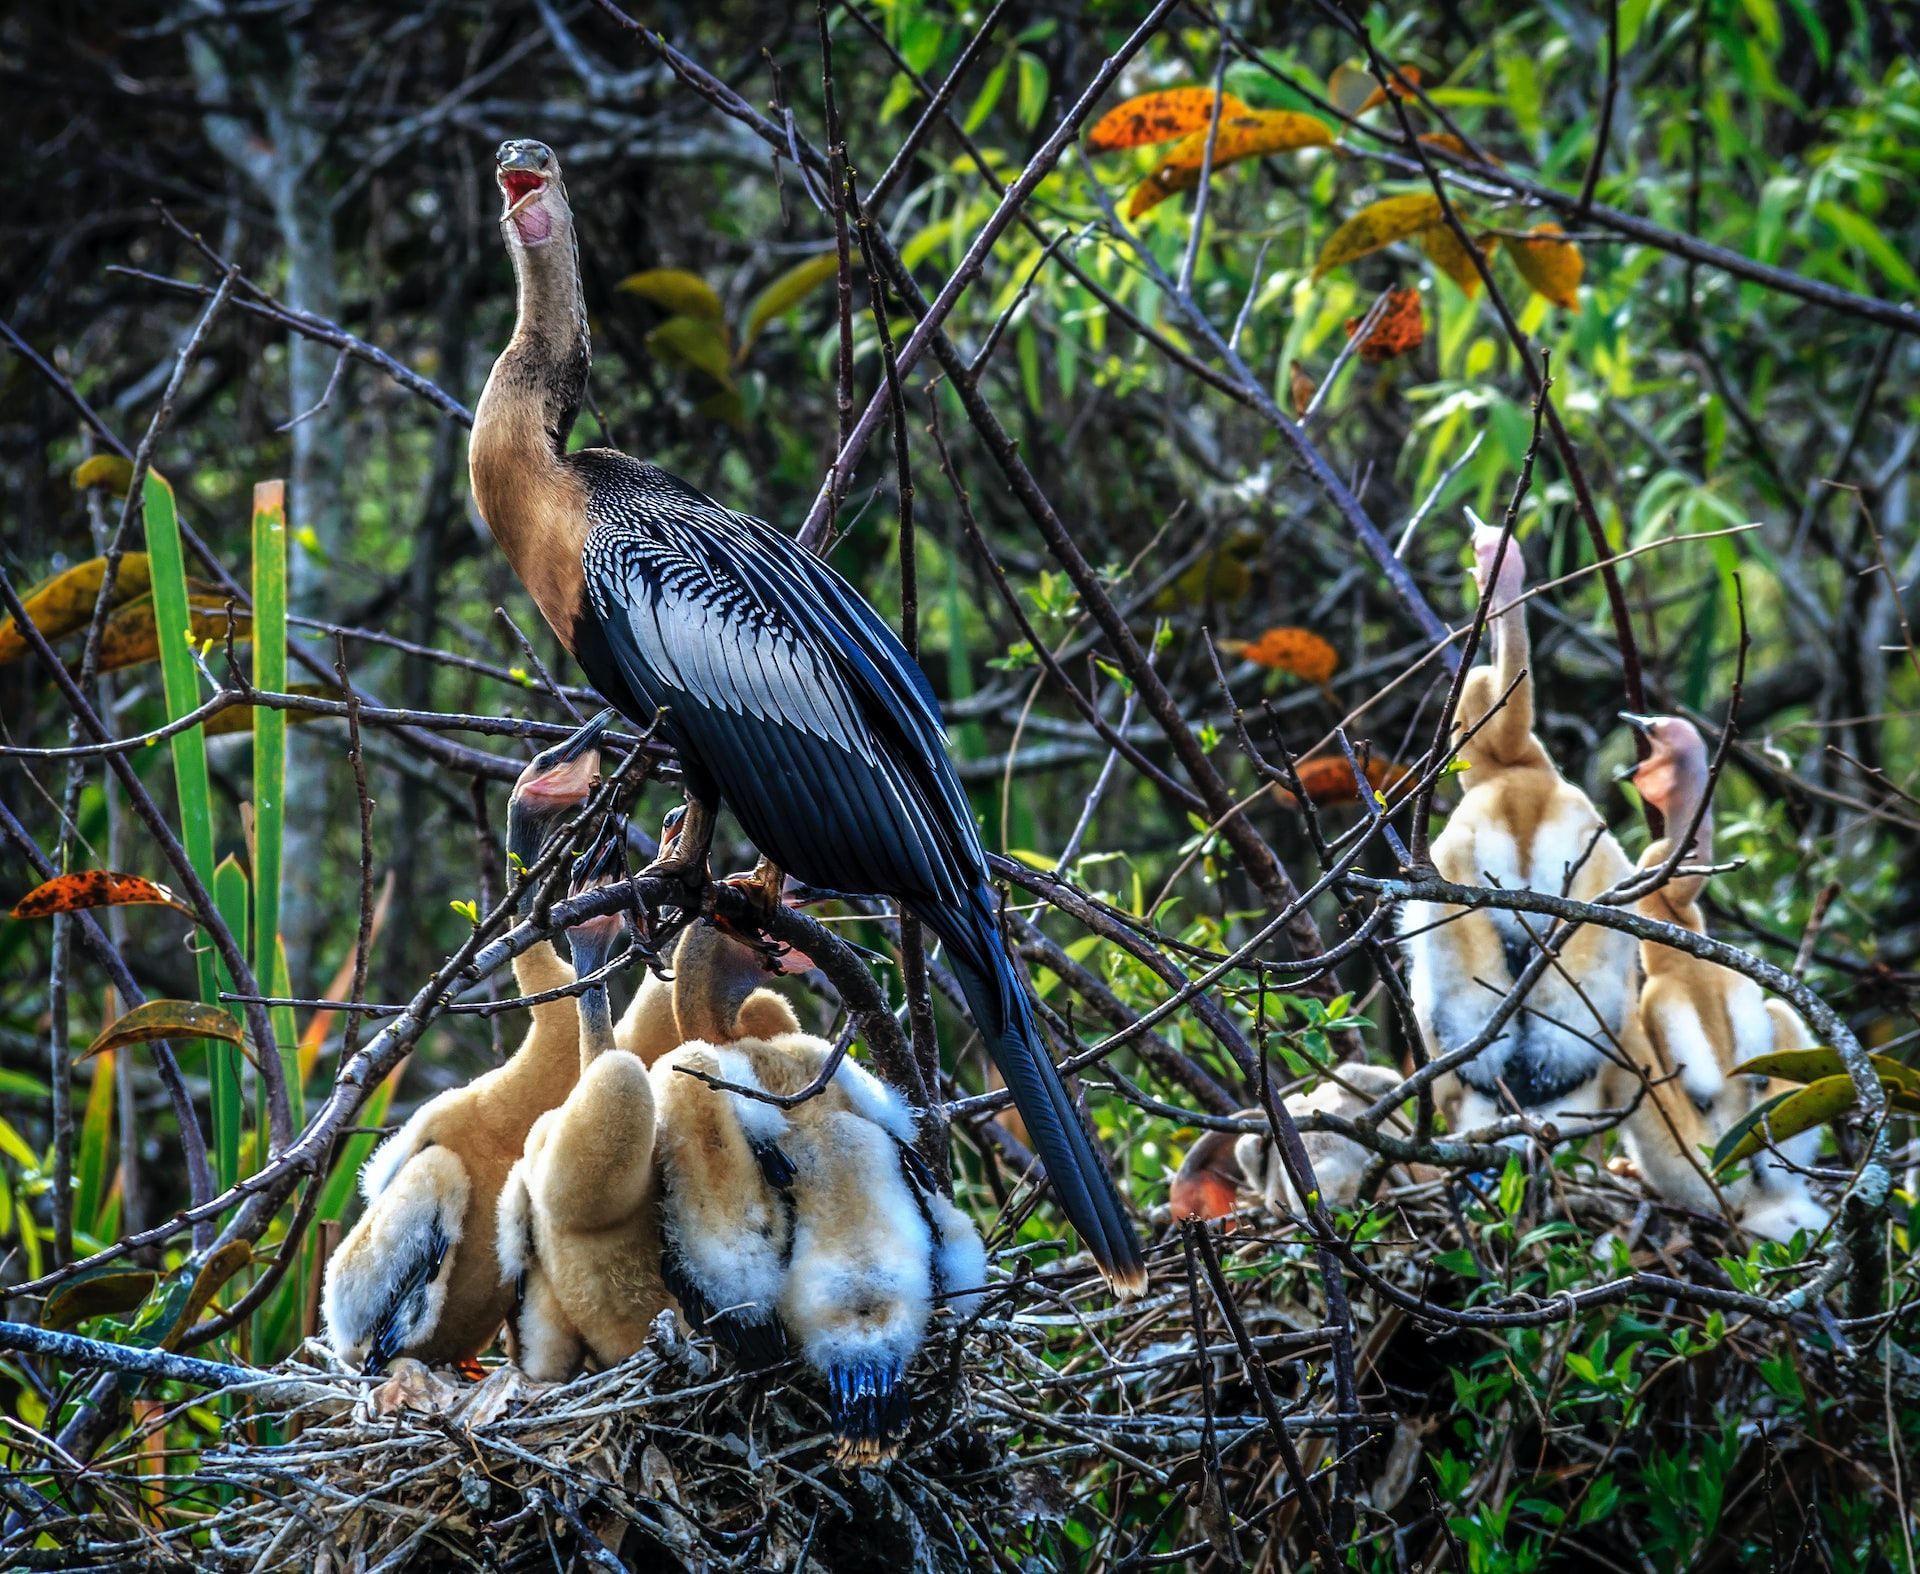 Nesting birds and chicks in the Everglades National Park in Florida, USA